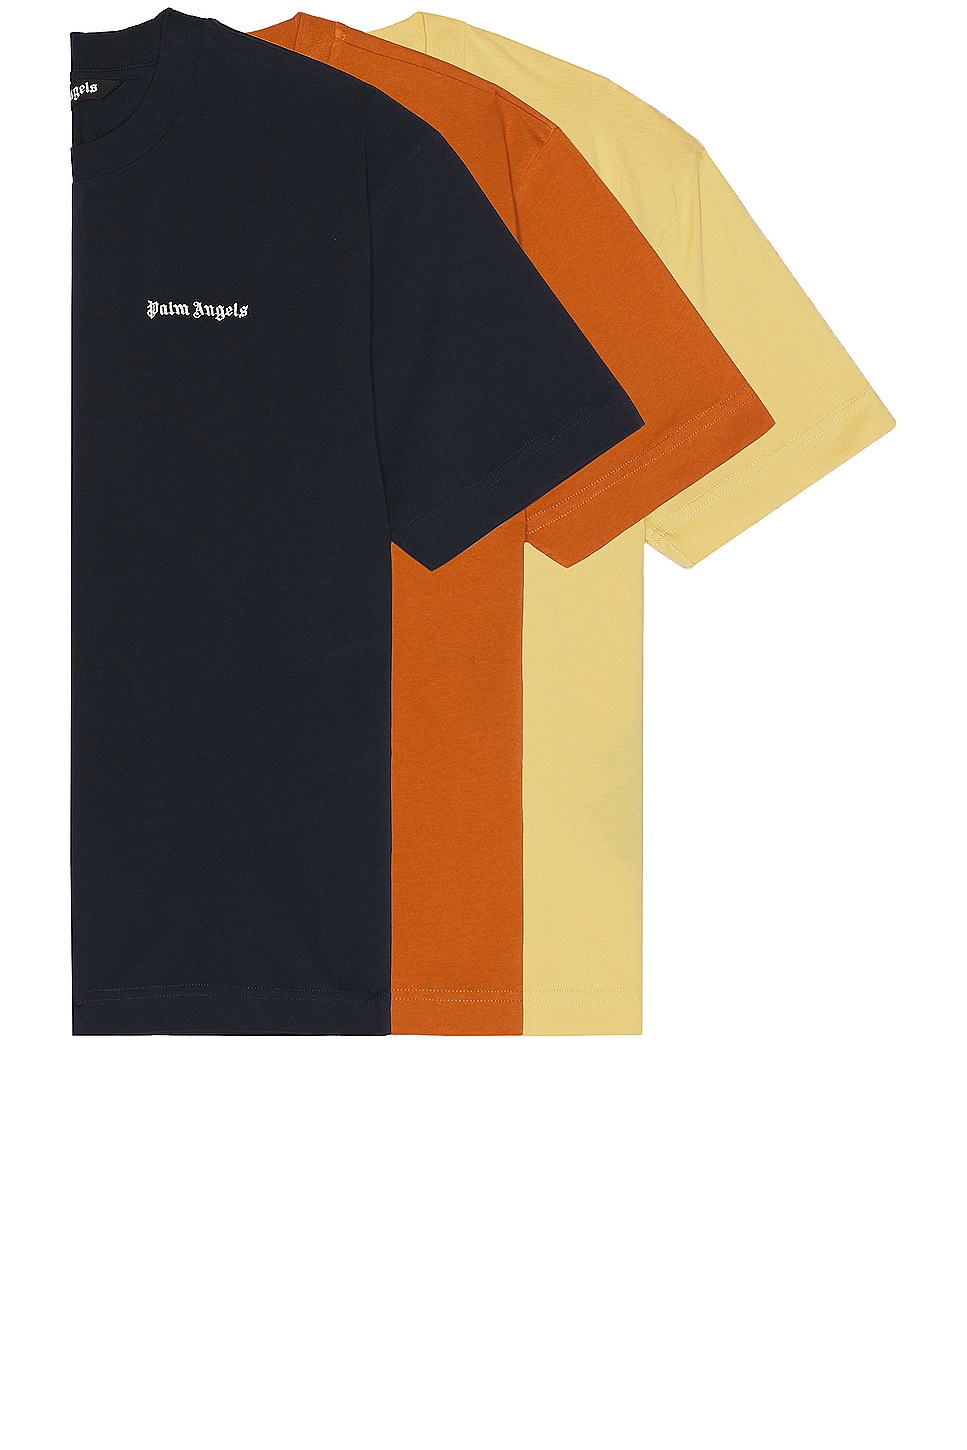 Image 1 of Palm Angels Classic Logo Tri Pack Tee in Multi